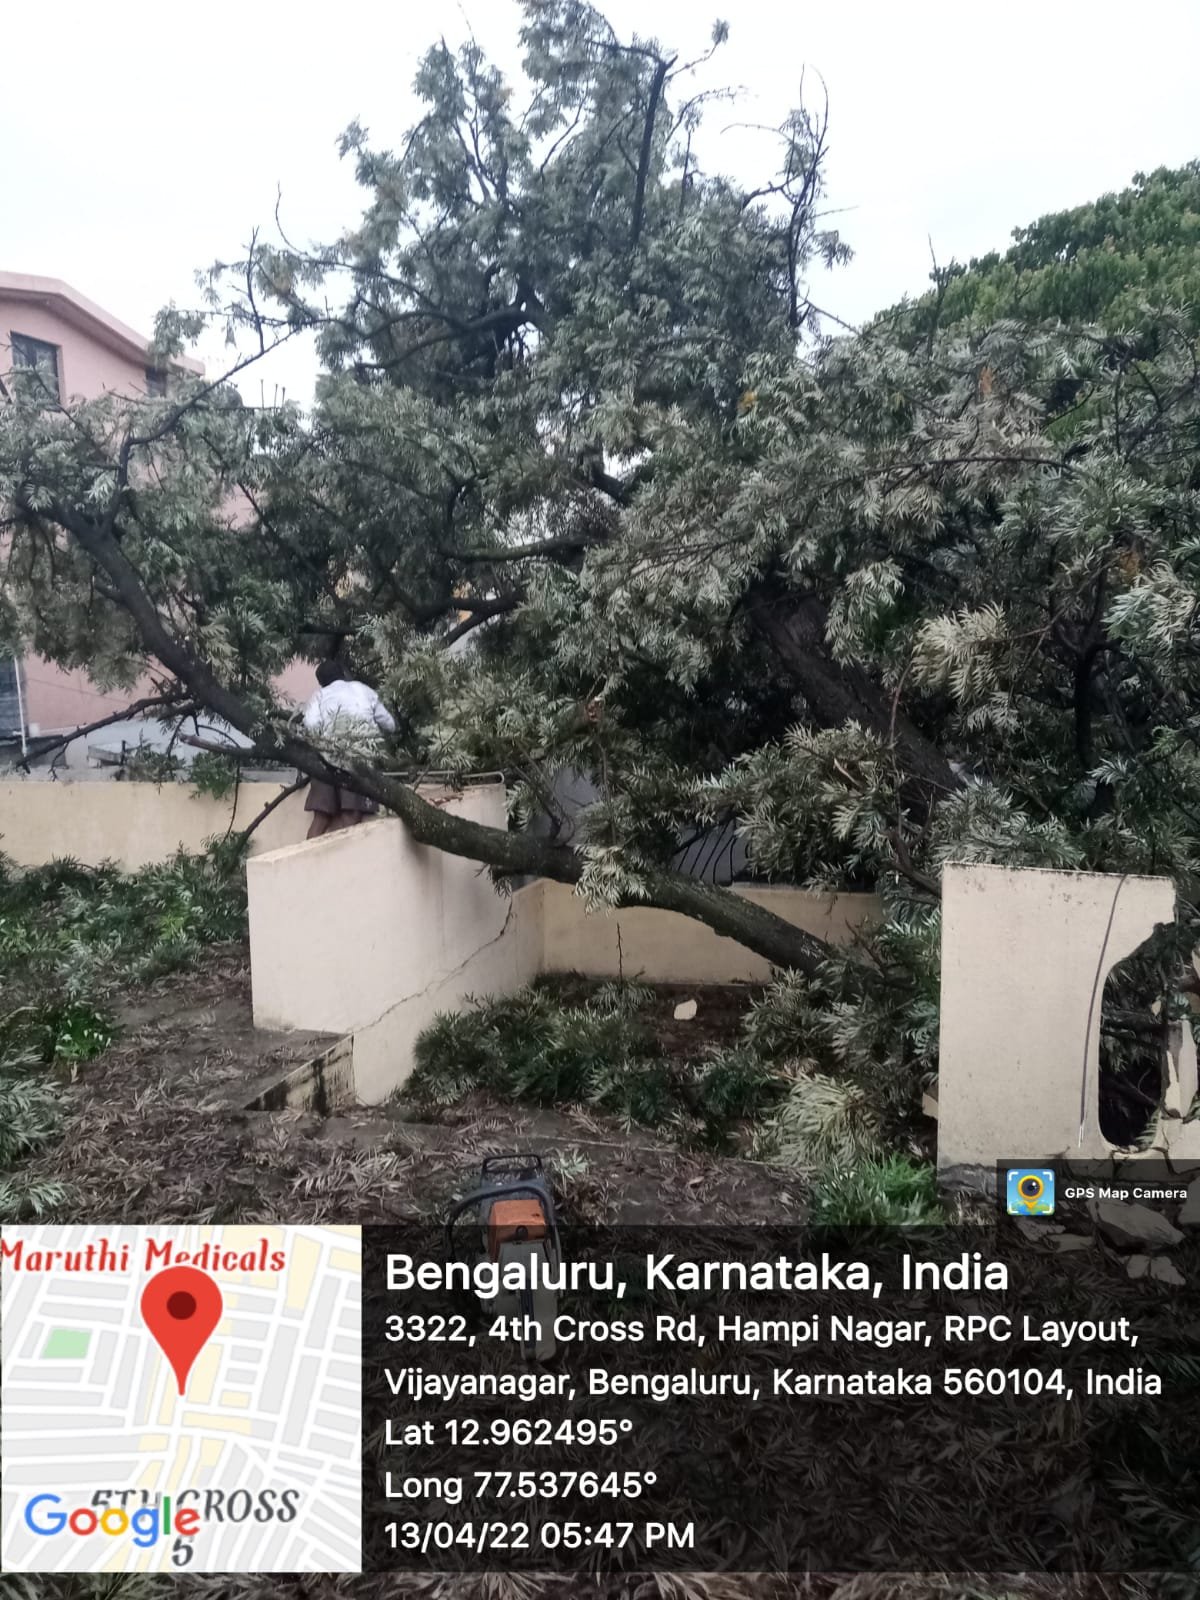 BBMP red alert as weatherman predicts rains for 3 days in Bengaluru treefall